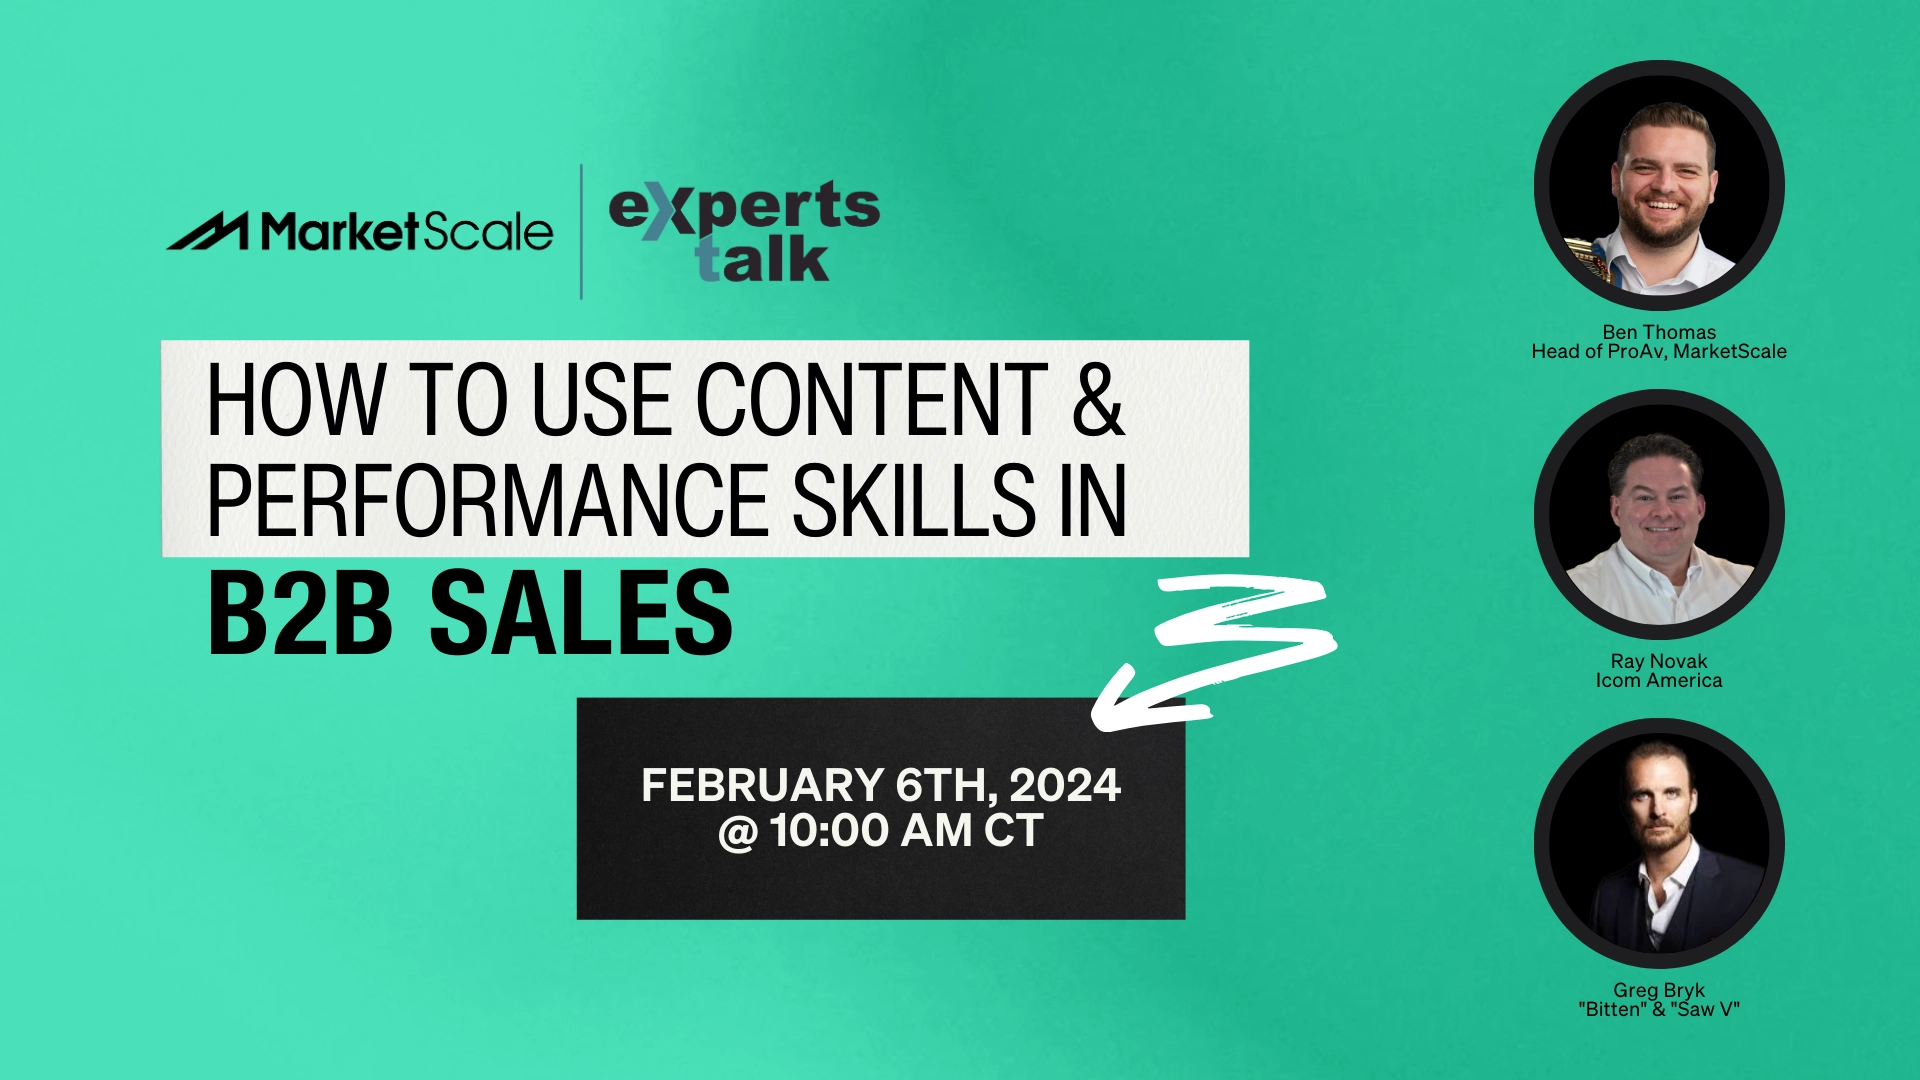 Content-Forward & Performance Skills are Elevating Storytelling in B2B Sales